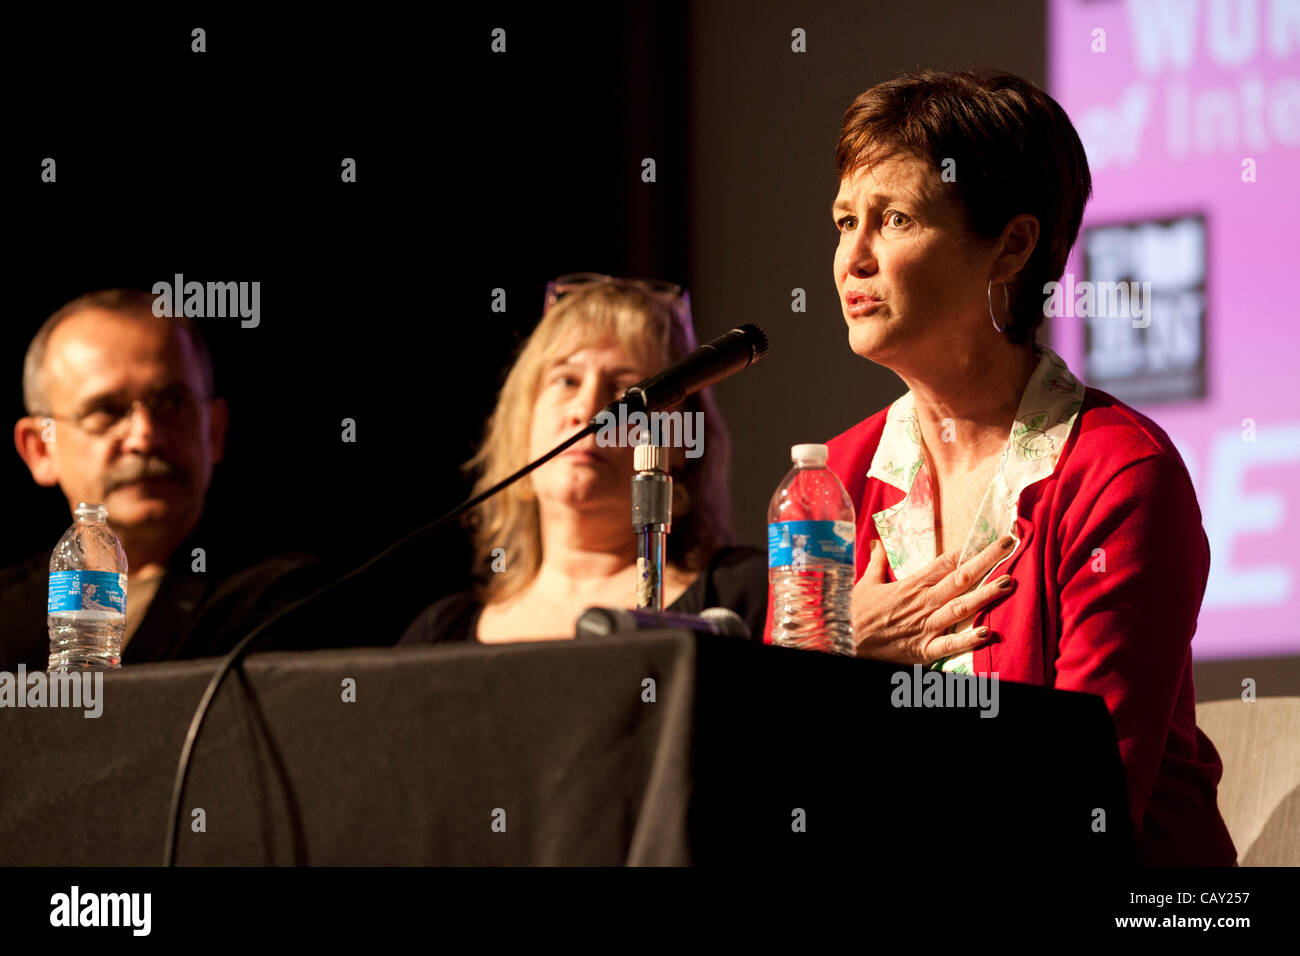 Panel on Children's Rights at Pen World Voices Festival, New York, NY, May 5, 2012, with moderator Susanna Reich (PEN), Polish Journalist Wojciech Jagielski (L), authors Debby Dahl Edwardson (M) and Patricia McCormack (R), and former child soldier Arn Chorn-Pond Stock Photo